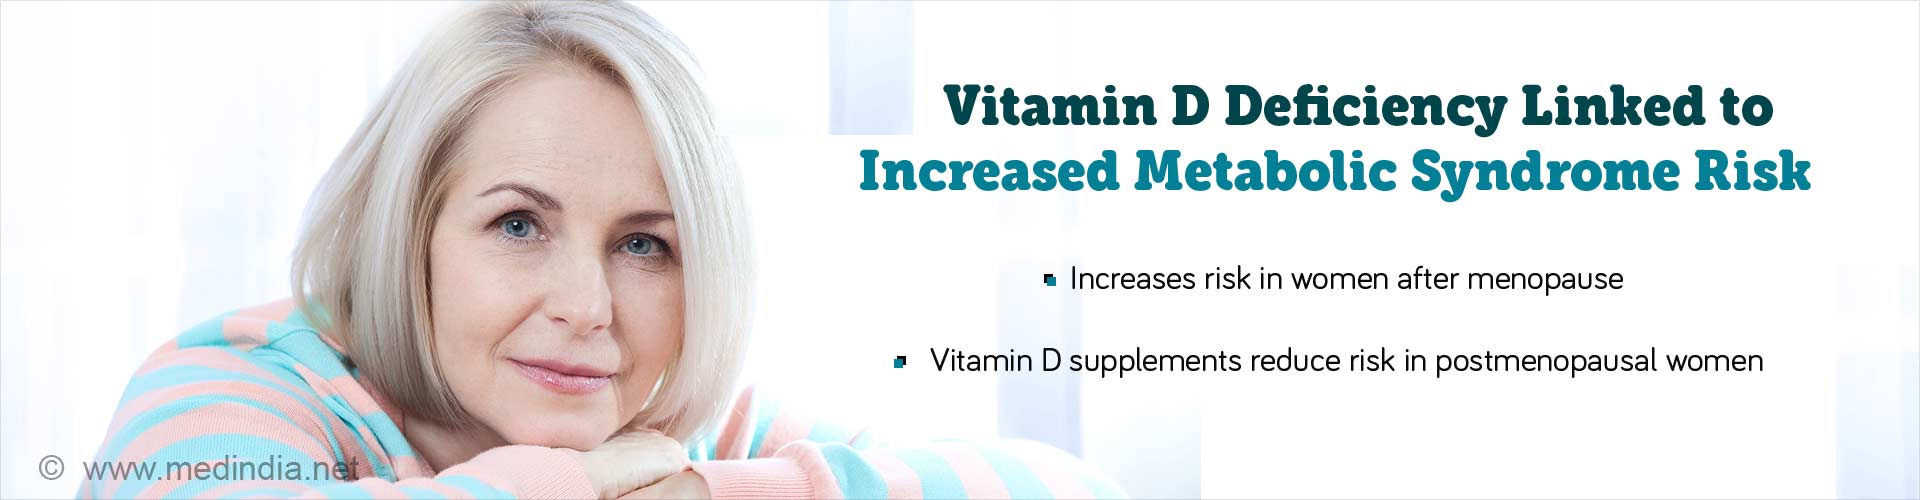 vitamin d deficiency linked to increased metabolic syndrome risk
- increases risk in women after menopause
- vitamin d supplements reduce reduce risk in postmenopausal women